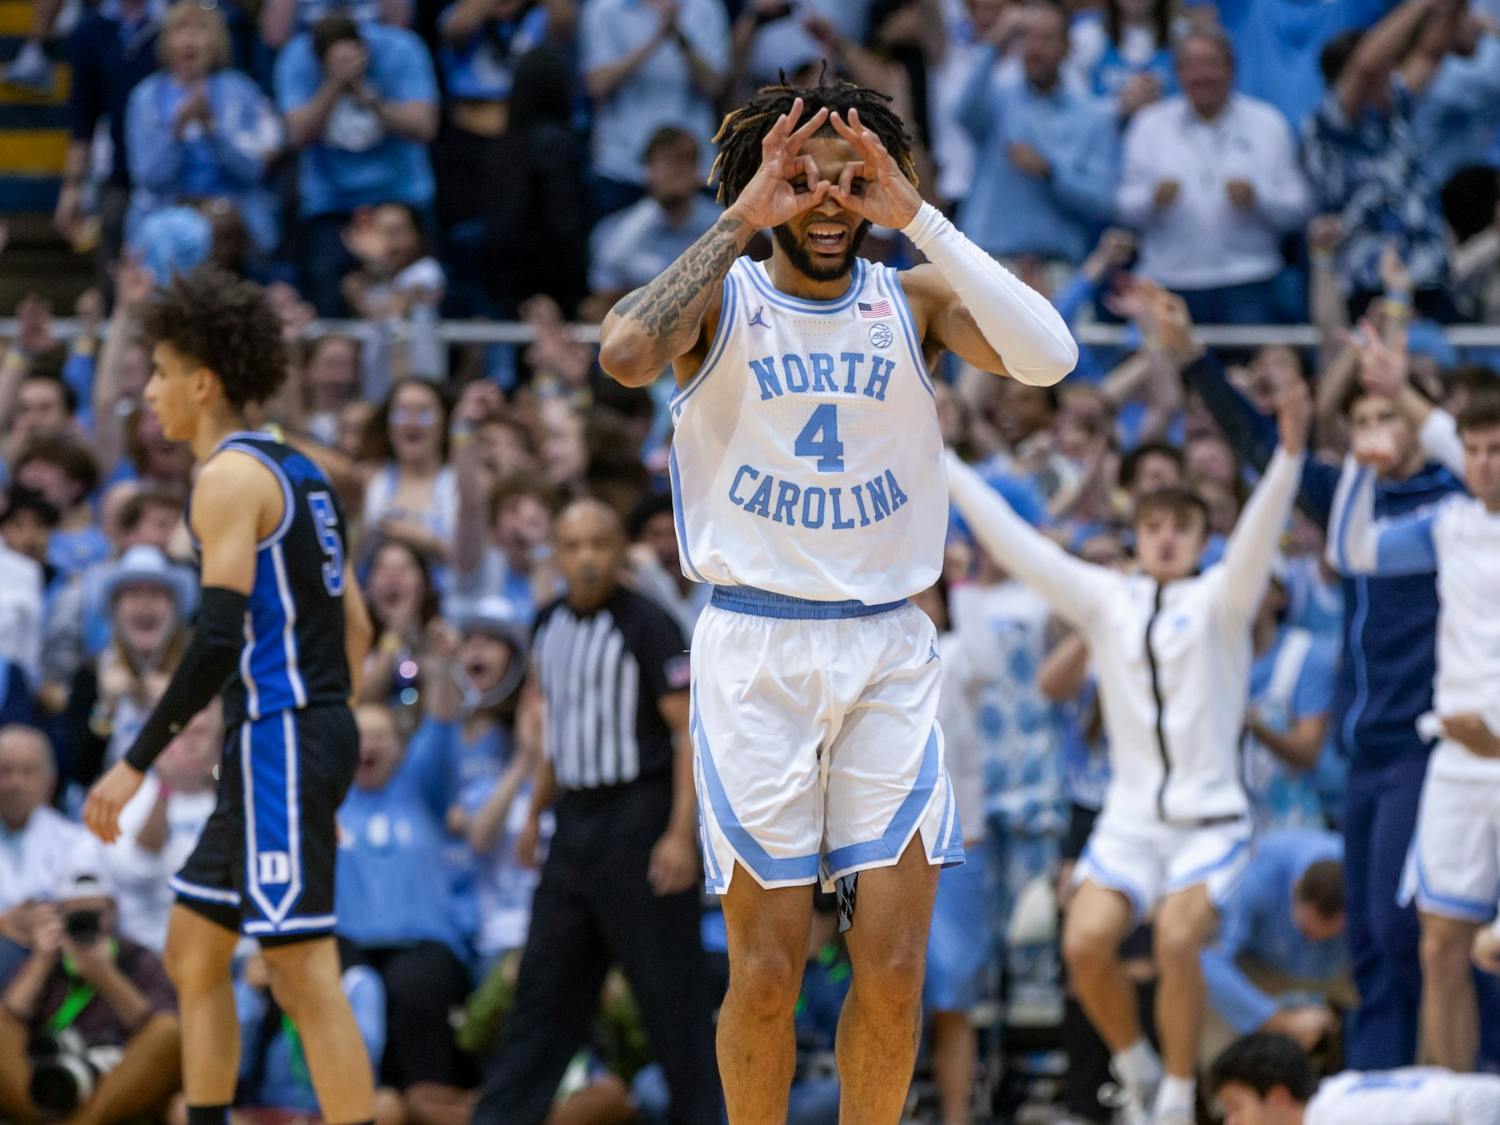 UNC junior guard RJ Davis (4) celebrates a three-pointer during the men's basketball game against Duke at the Dean E. Smith Center on Saturday, March 4, 2023. UNC fell to Duke 62-57.